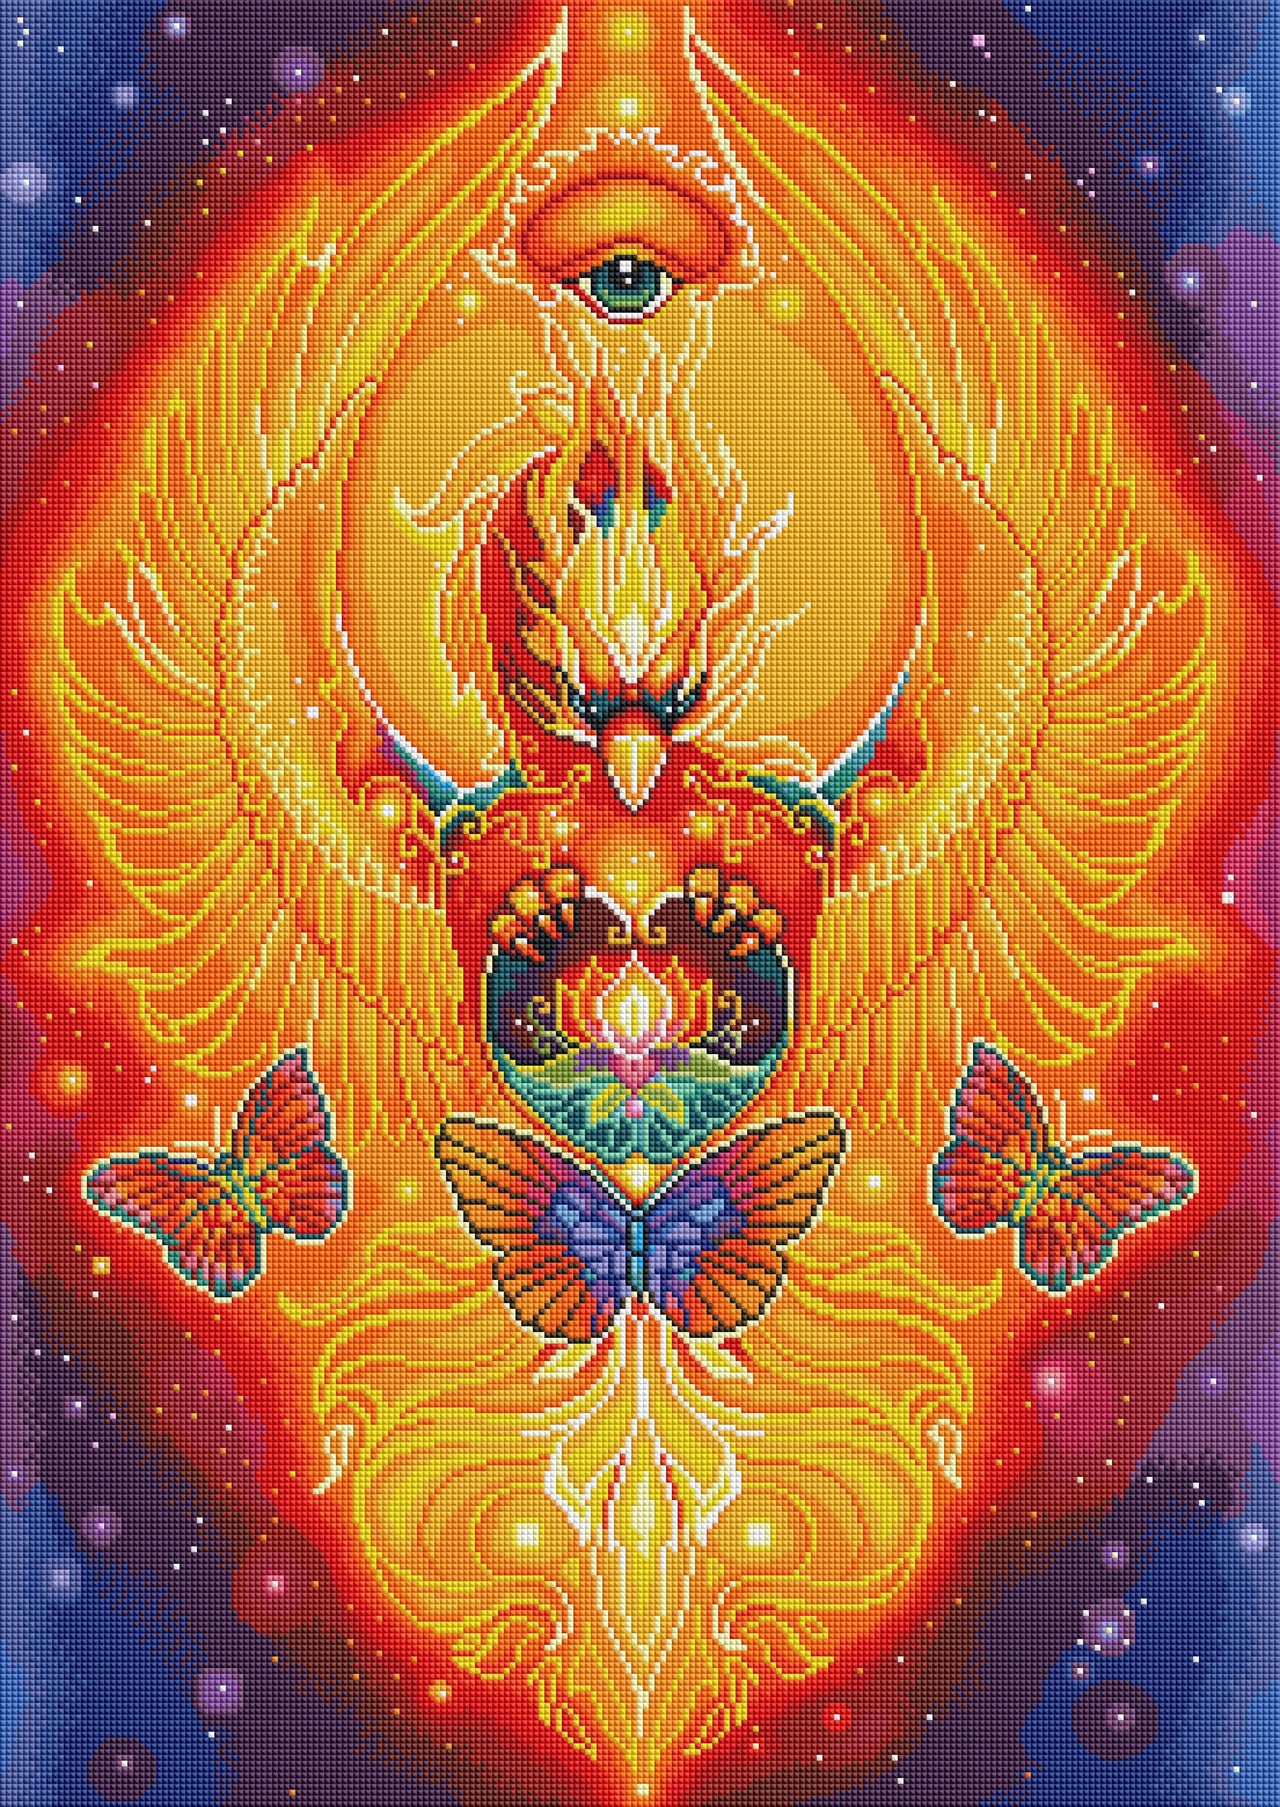 Diamond Painting Phoenix 22" x 31" (56cm x 79cm) / Square With 43 Colors Including 4 ABs / 68,952